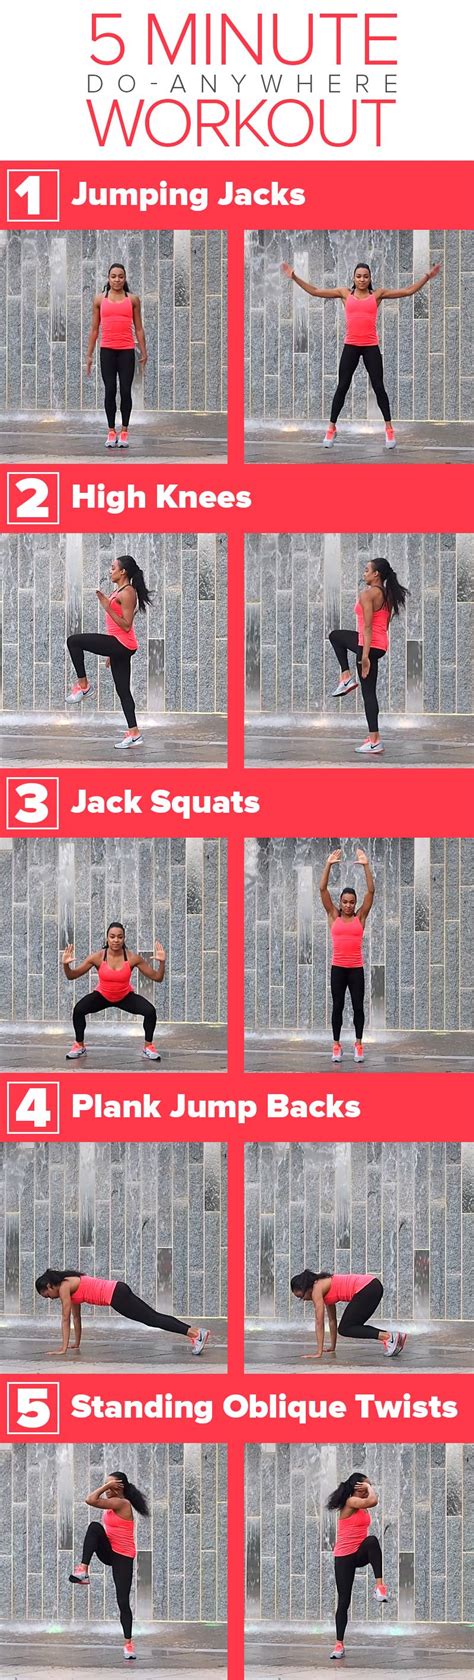 5 Minute Workout You Can Do Anywhere Full Body Workout Routine